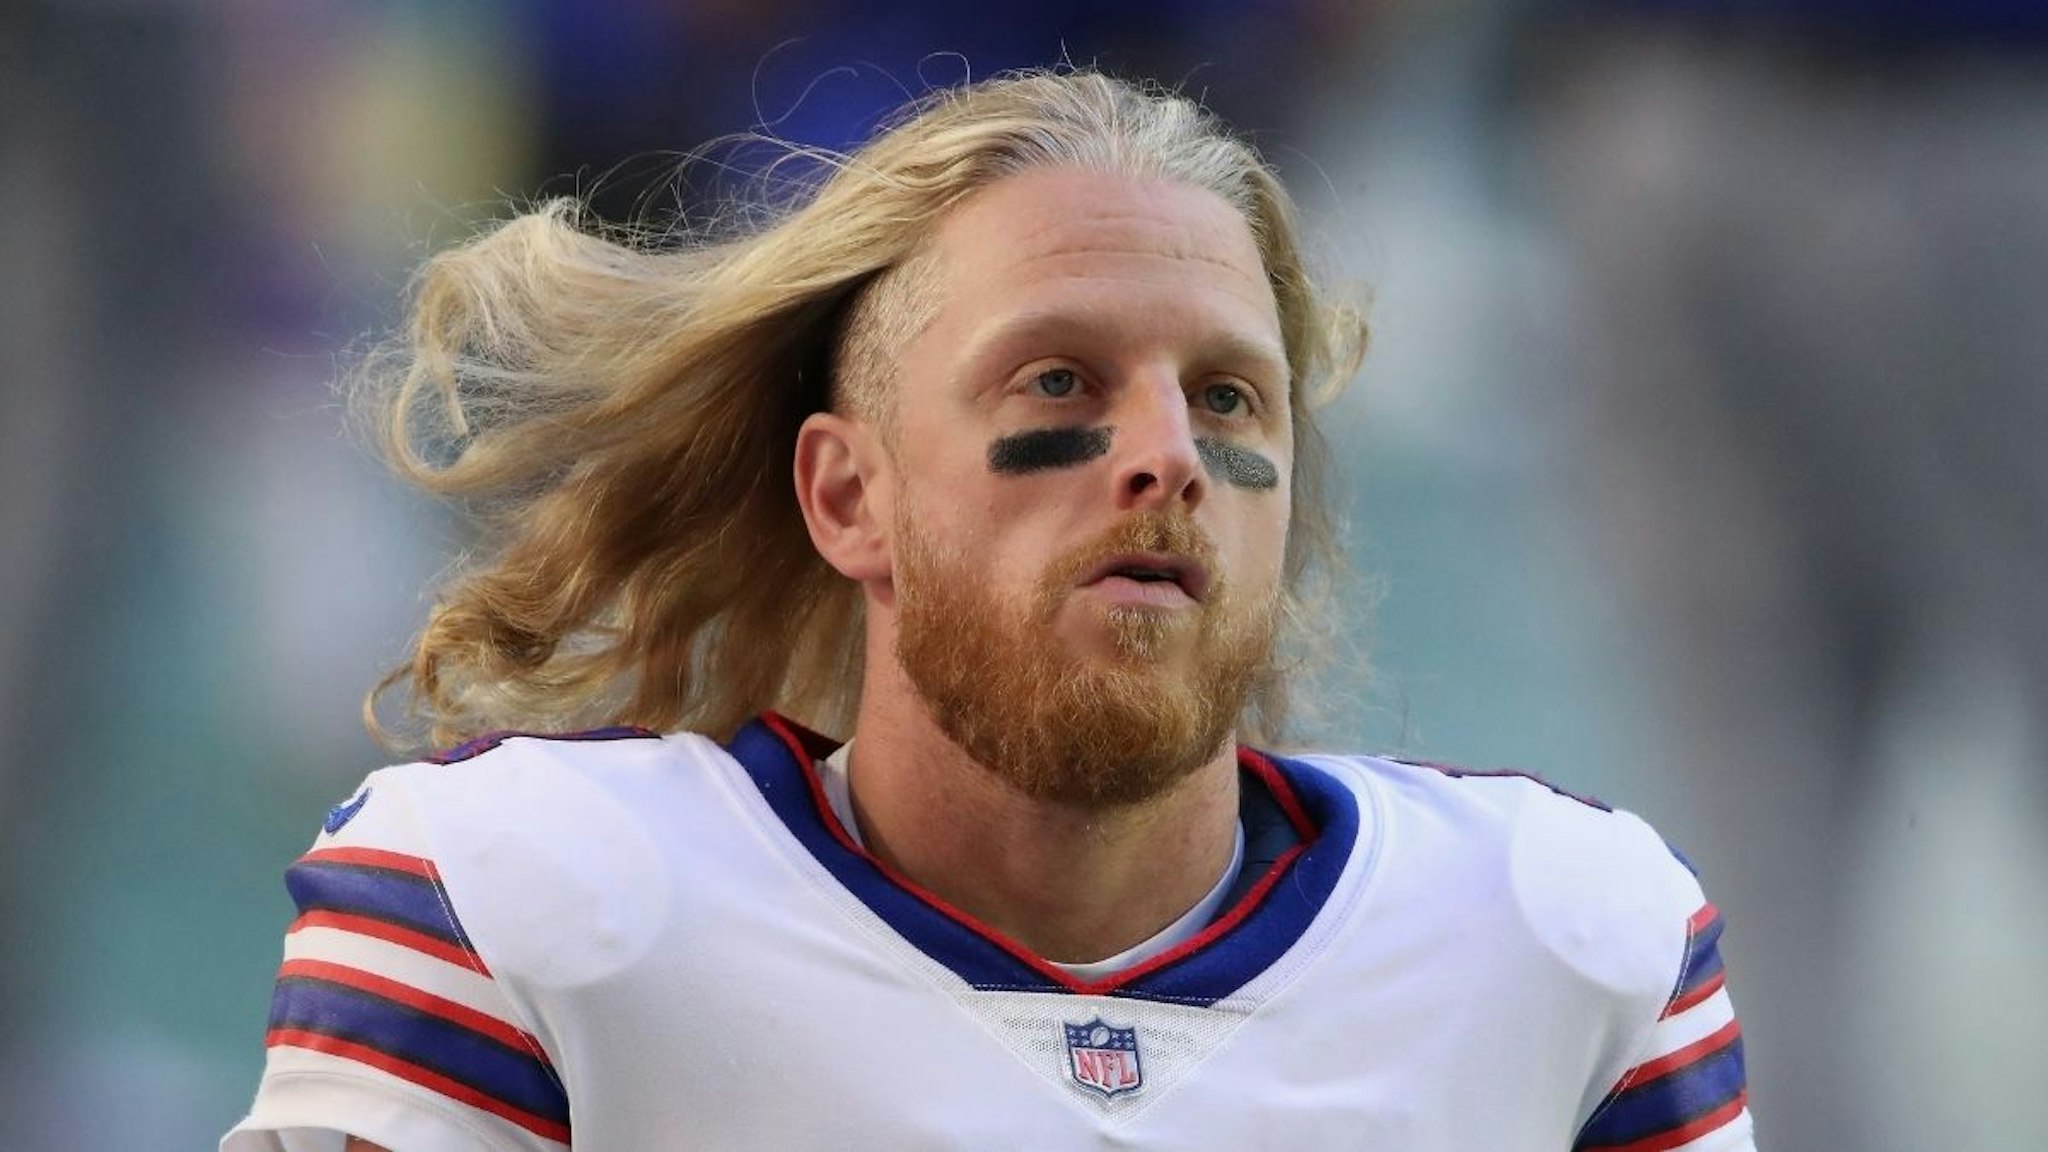 Wide receiver Cole Beasley #11 of the Buffalo Bills during the NFL game against the Arizona Cardinals at State Farm Stadium on November 15, 2020 in Glendale, Arizona.